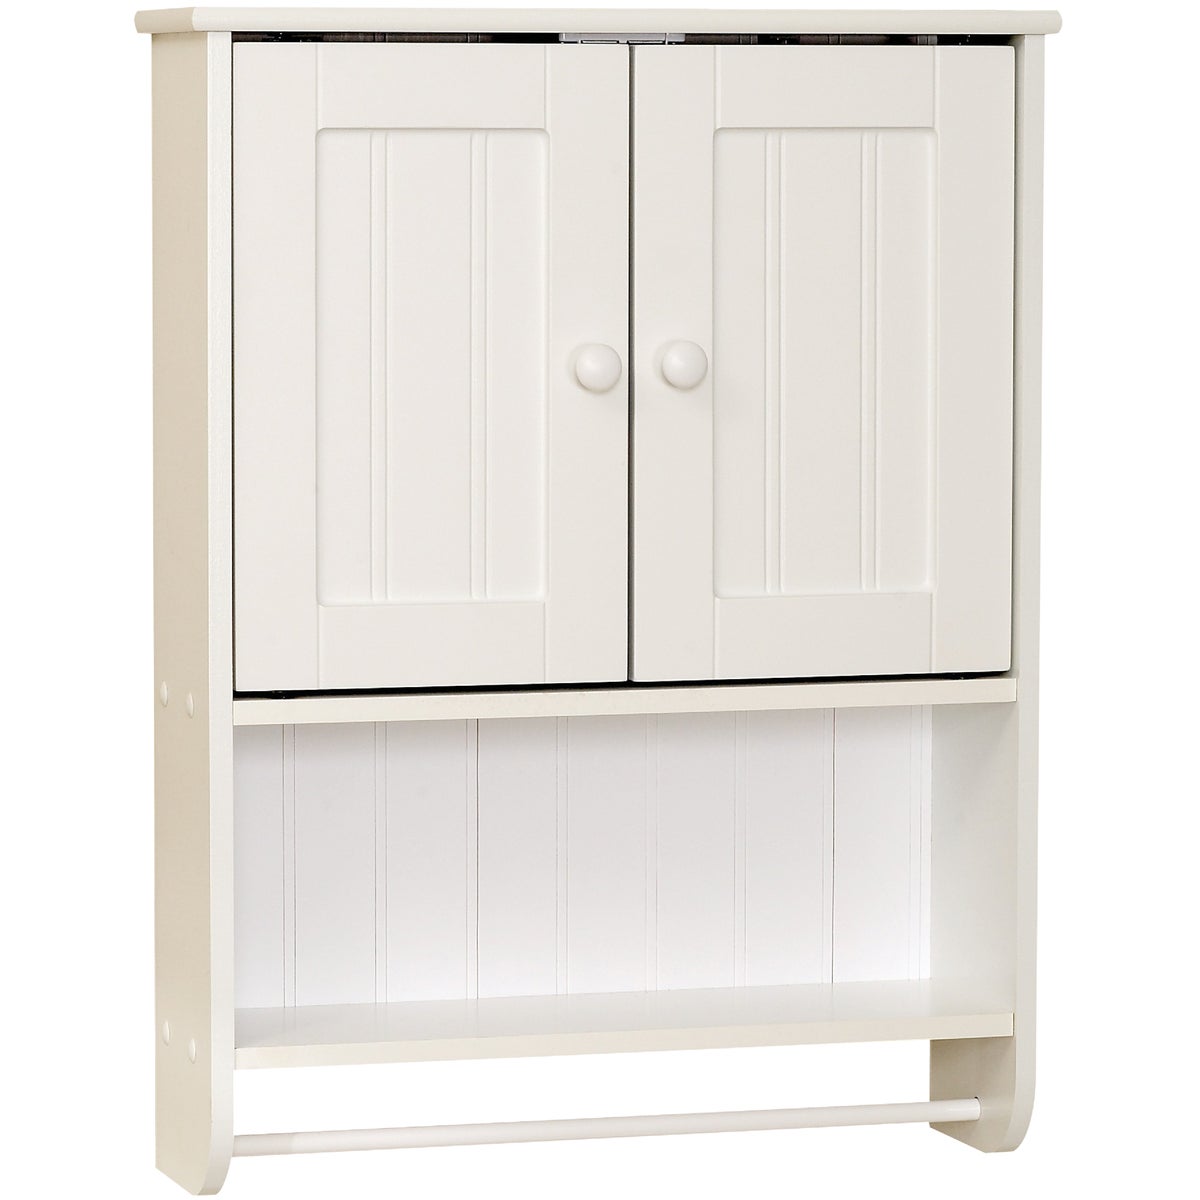 Zenith Country Cottage White 21-5/8 In. W. x 6-3/4 In. D. x 25-3/4 In. H. Wall Bath Cabinet